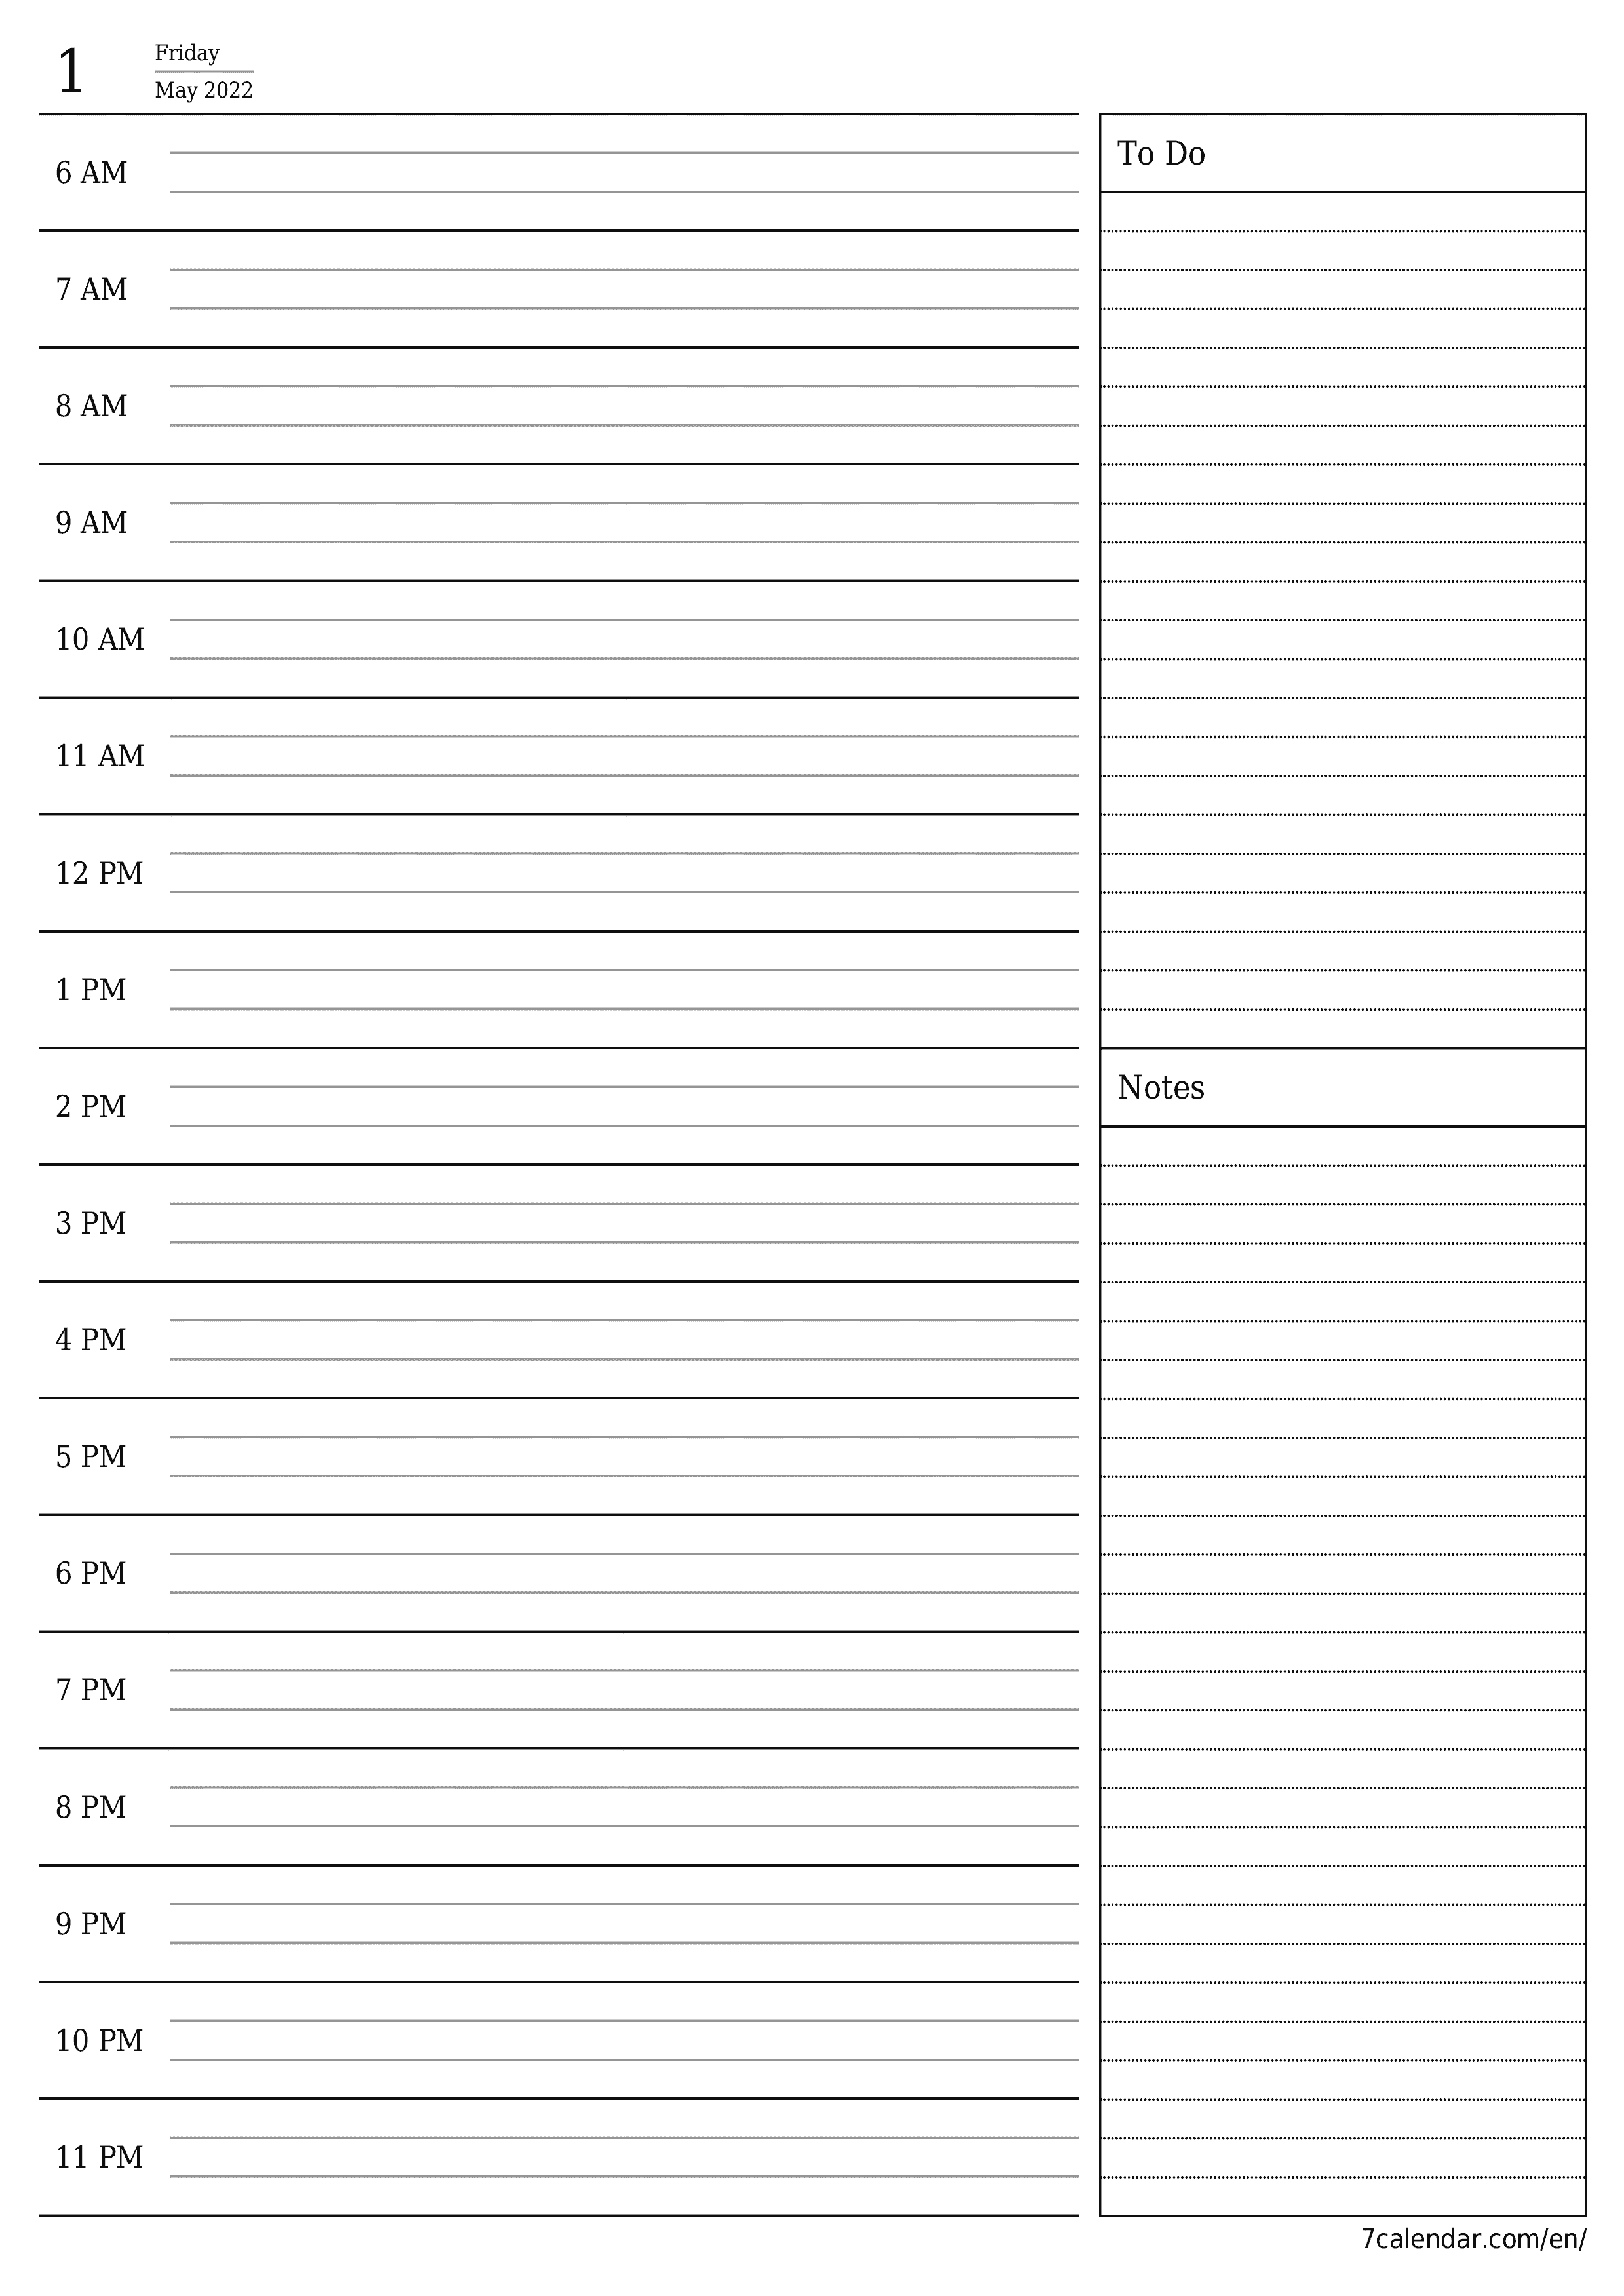 Blank daily calendar planner for day May 2022 with notes, save and print to PDF PNG English - 7calendar.com